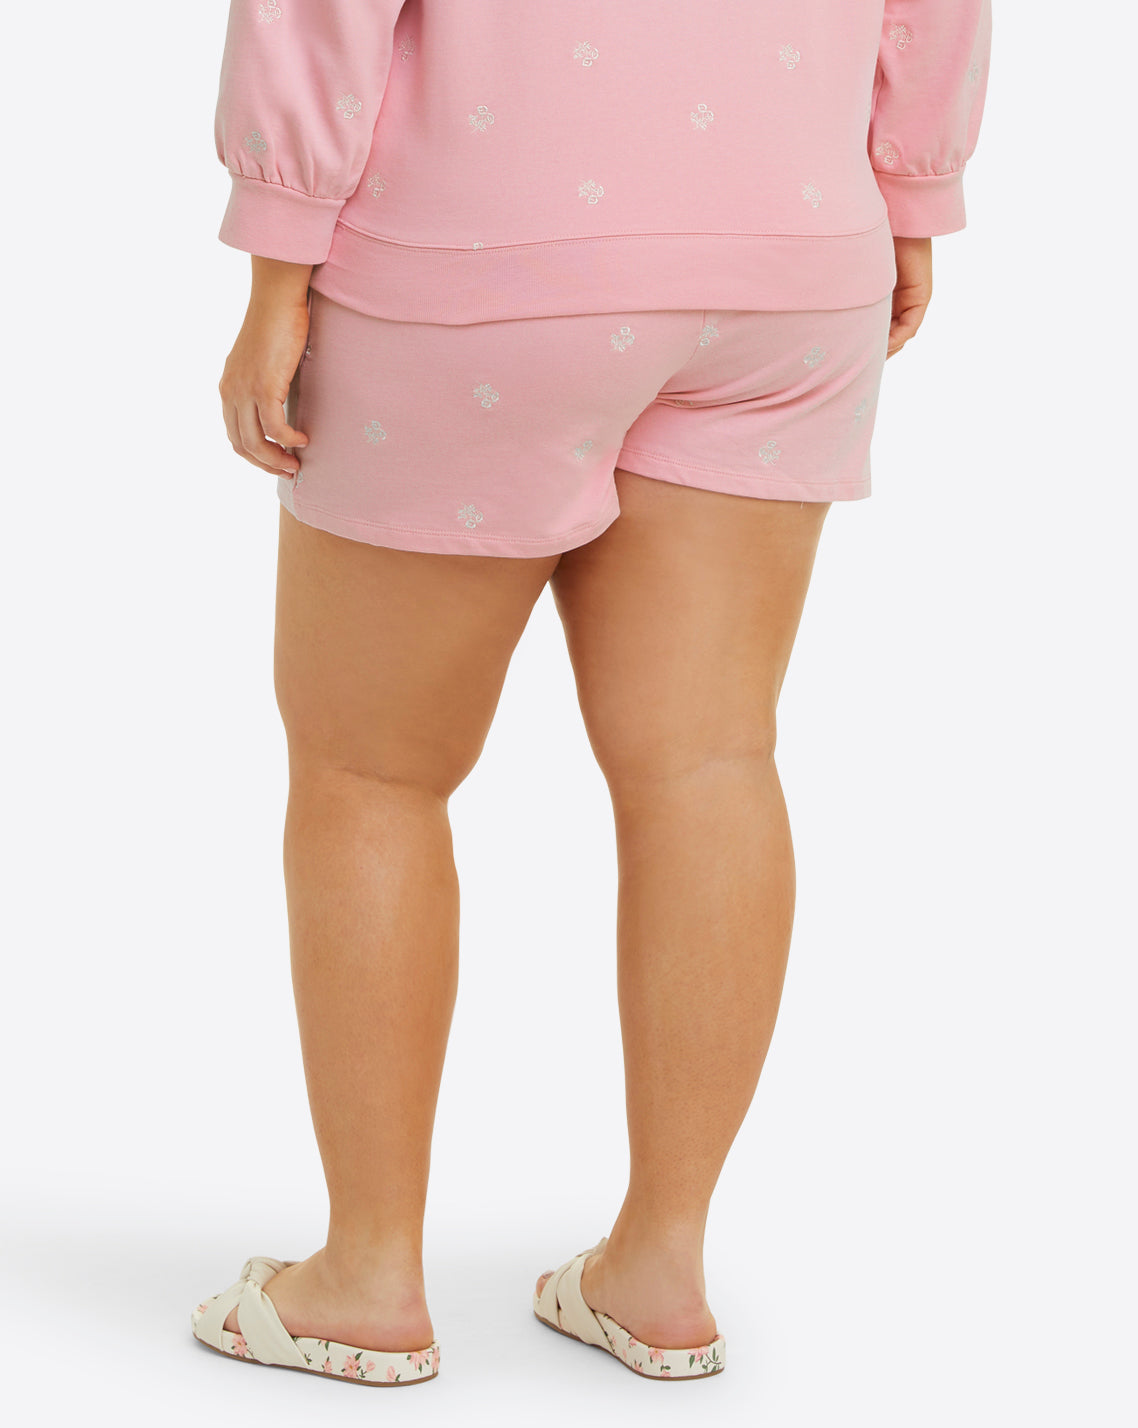 Bobbie Sweat Shorts in Pink Embroidered Viola